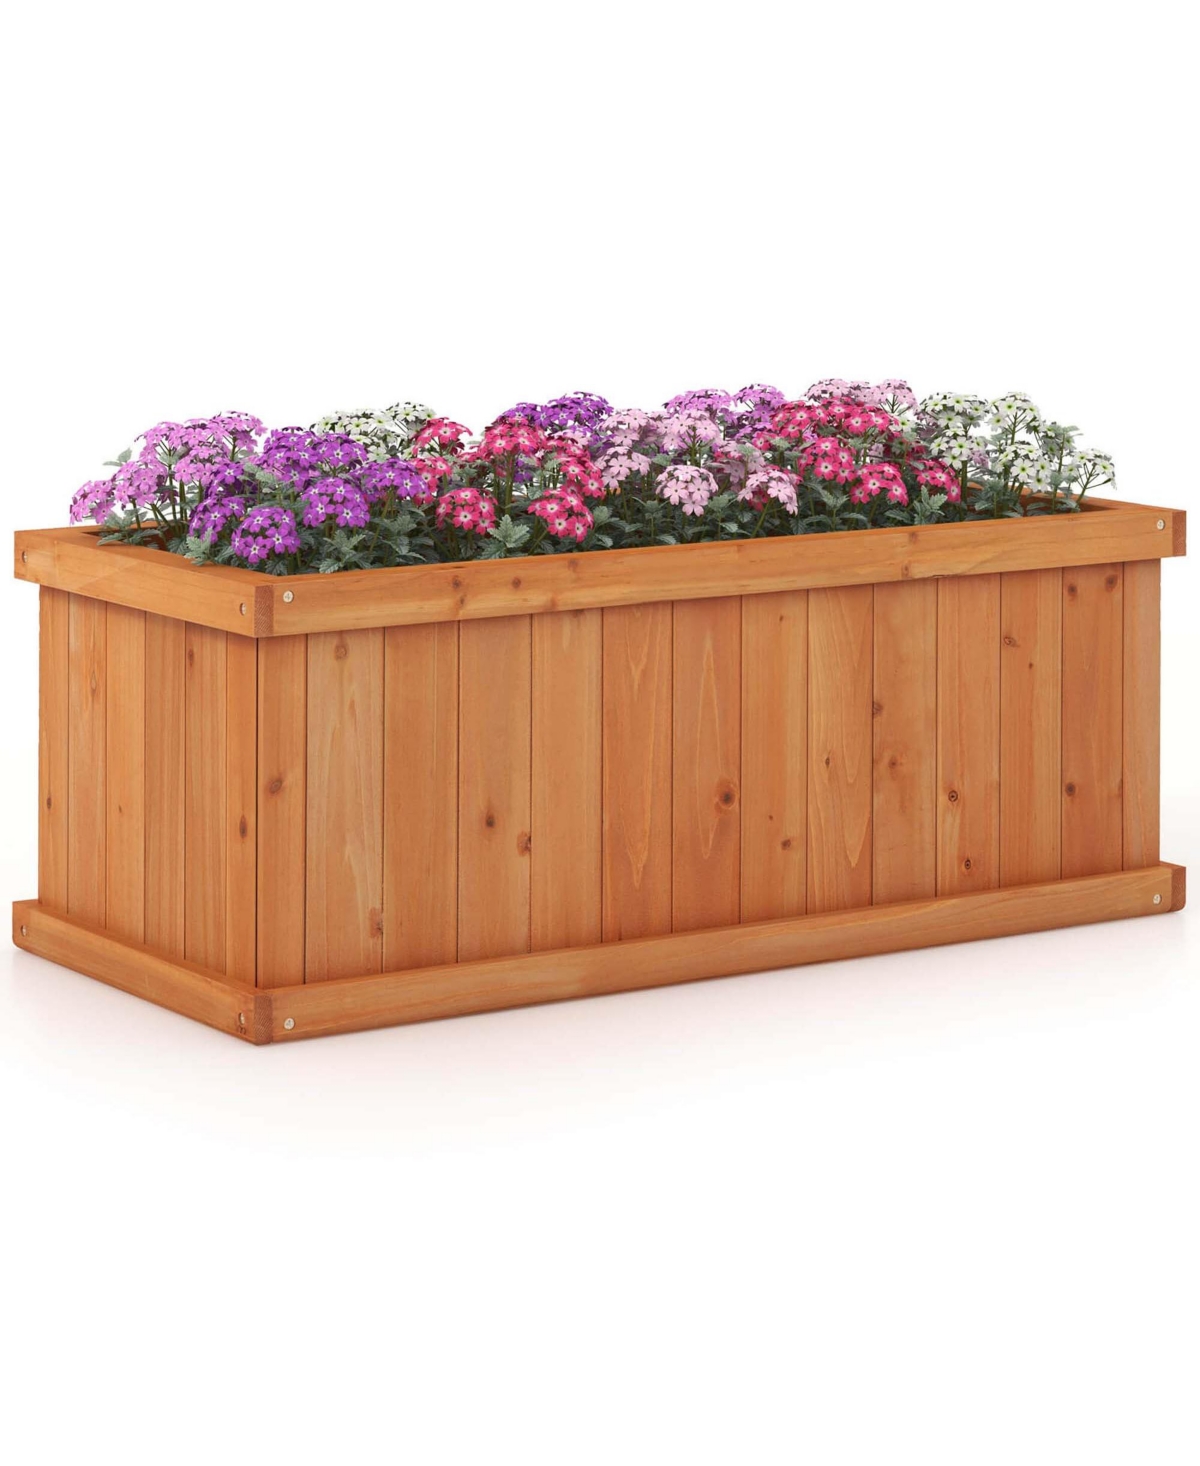 Raised Garden Bed Fir Wood Rectangle Planter Box with Drainage Holes - Orange